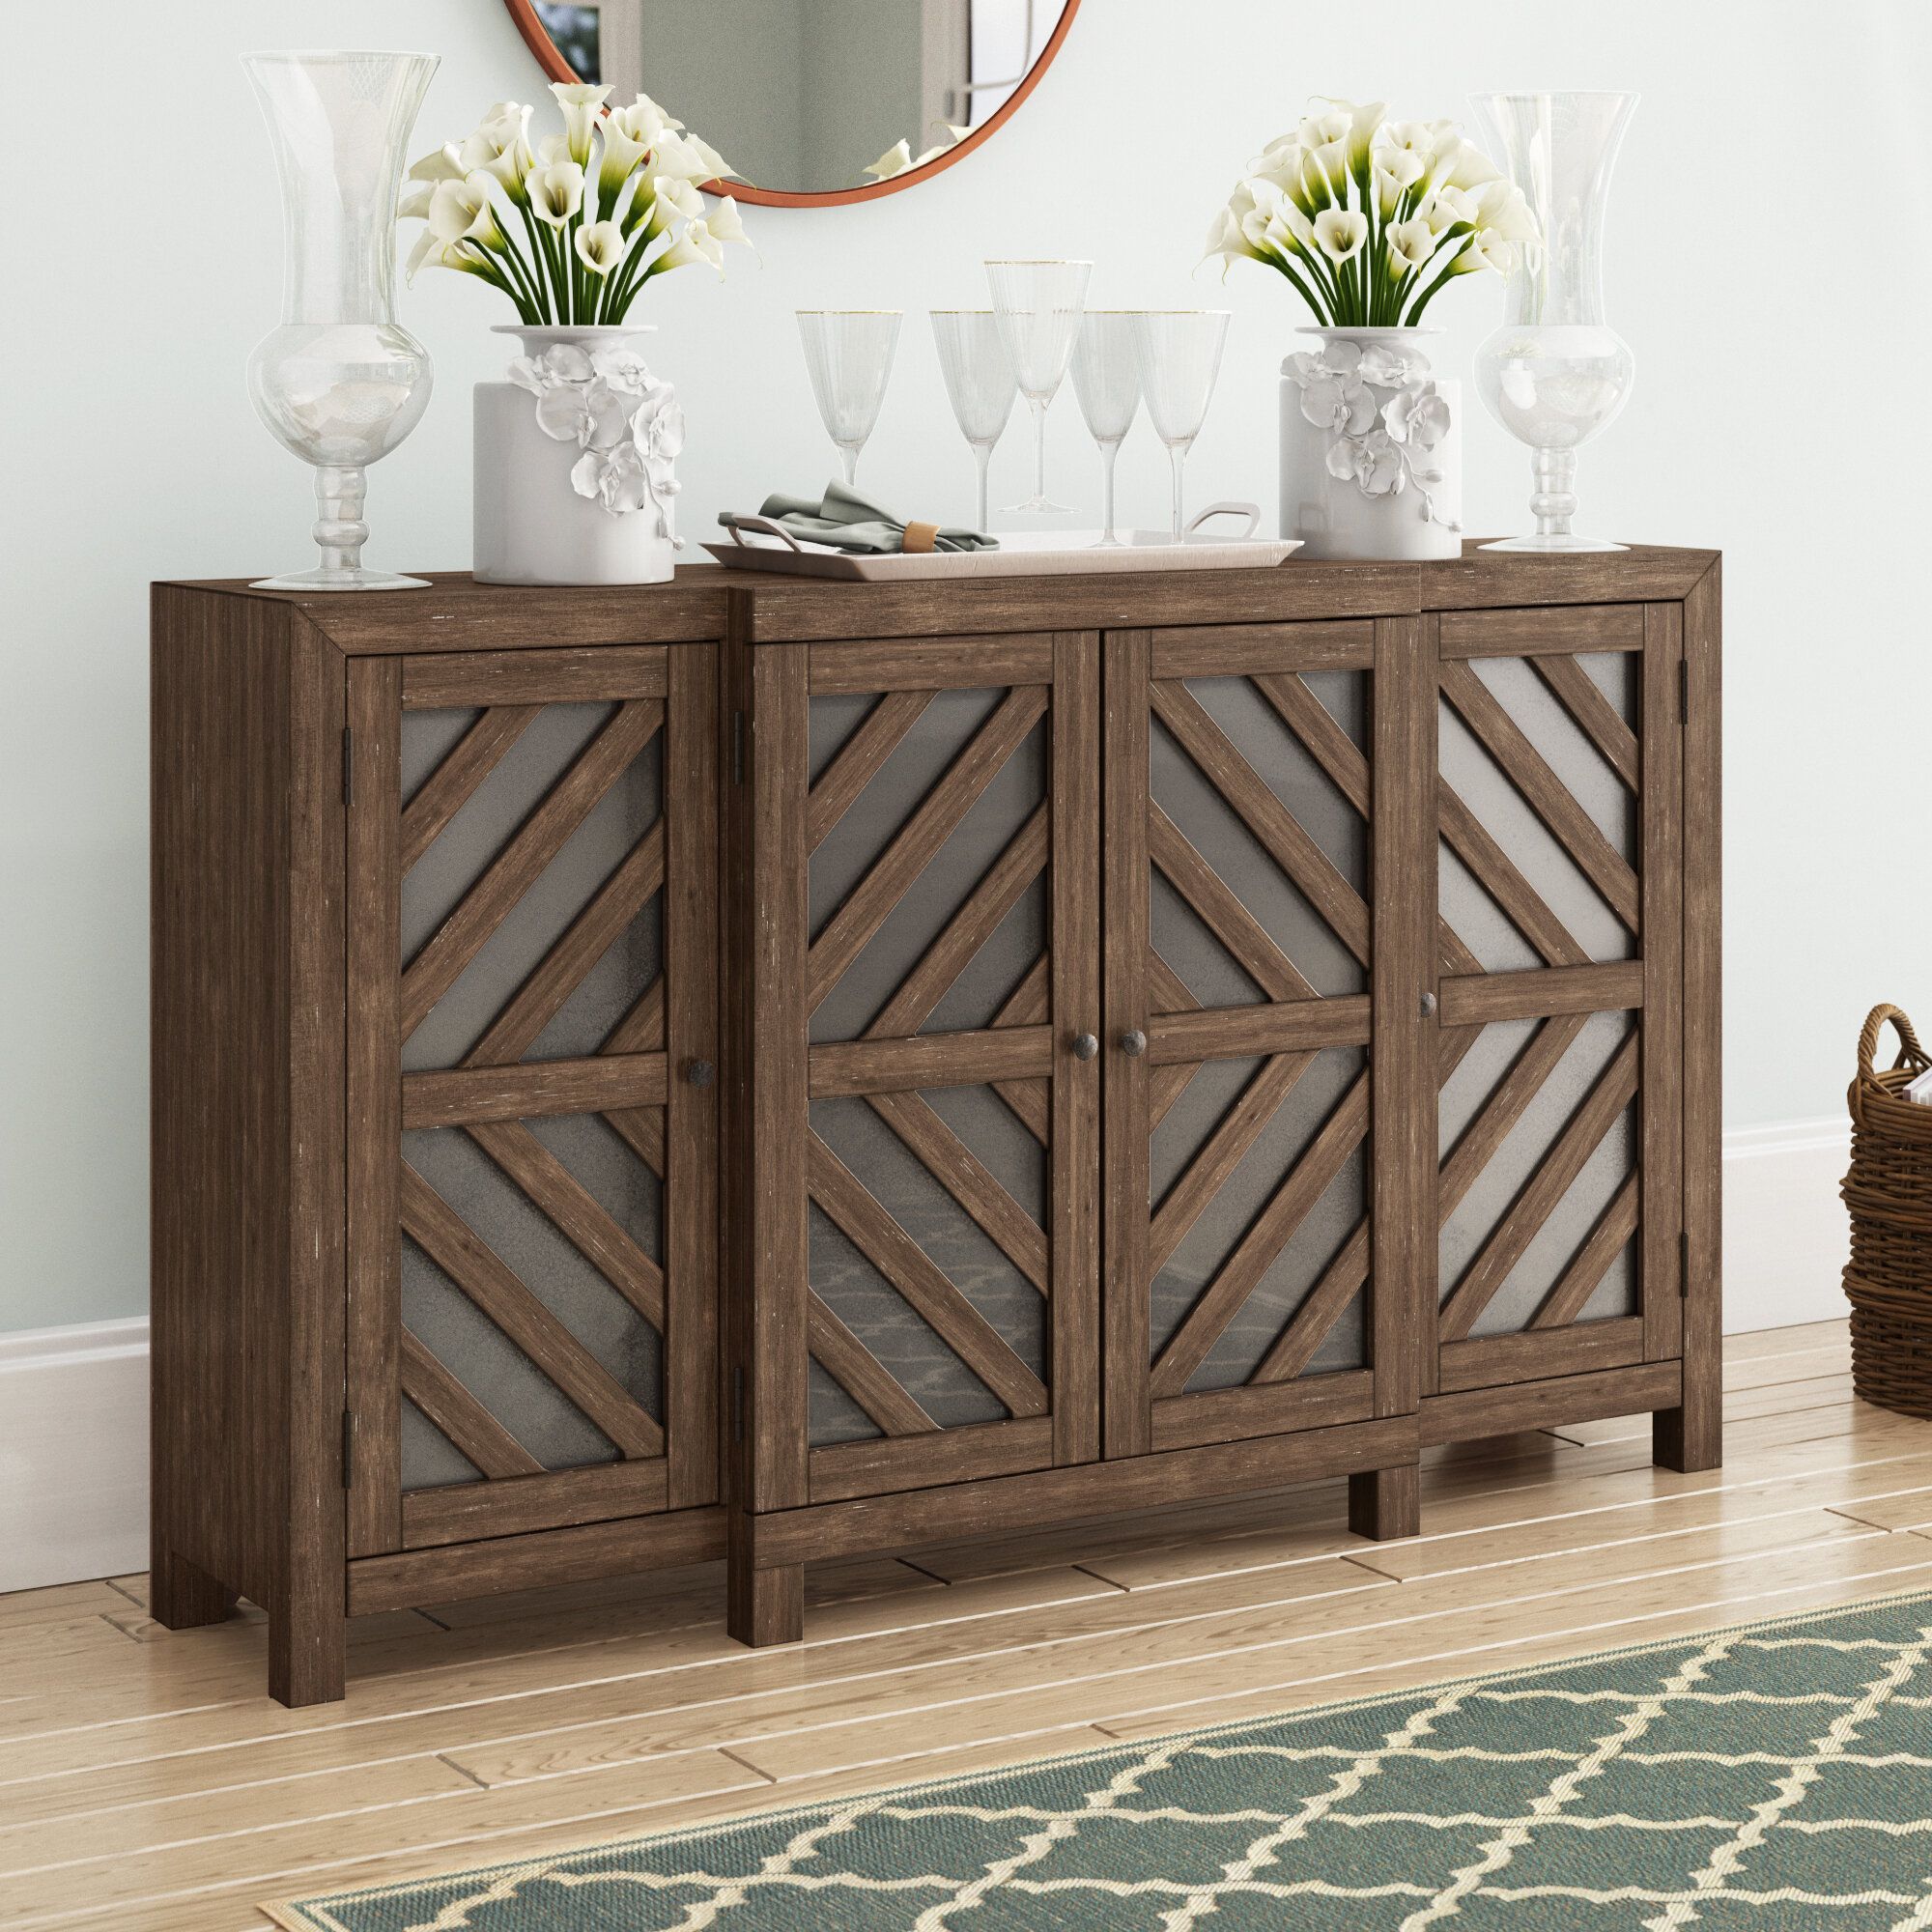 70 Inch Credenza You'll Love In 2019 | Wayfair With Abhinav Credenzas (View 5 of 30)